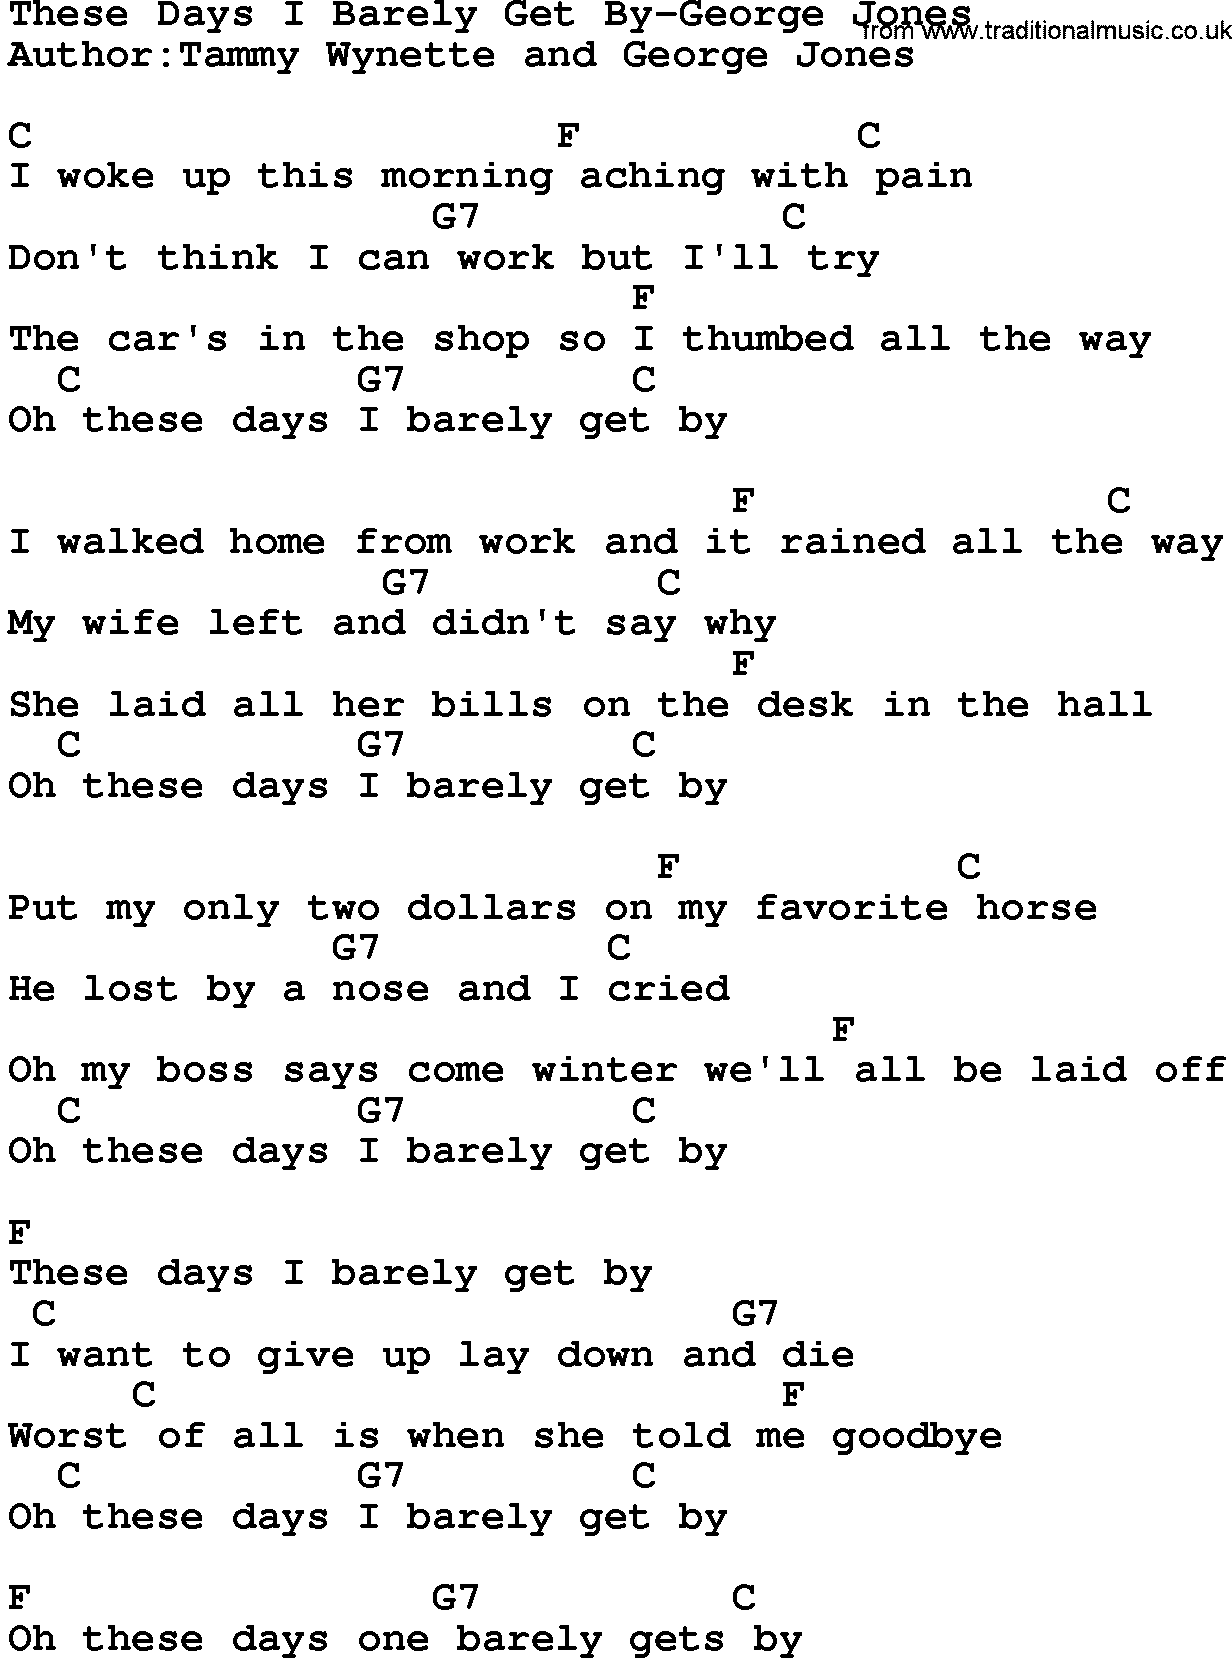 Country music song: These Days I Barely Get By-George Jones lyrics and chords